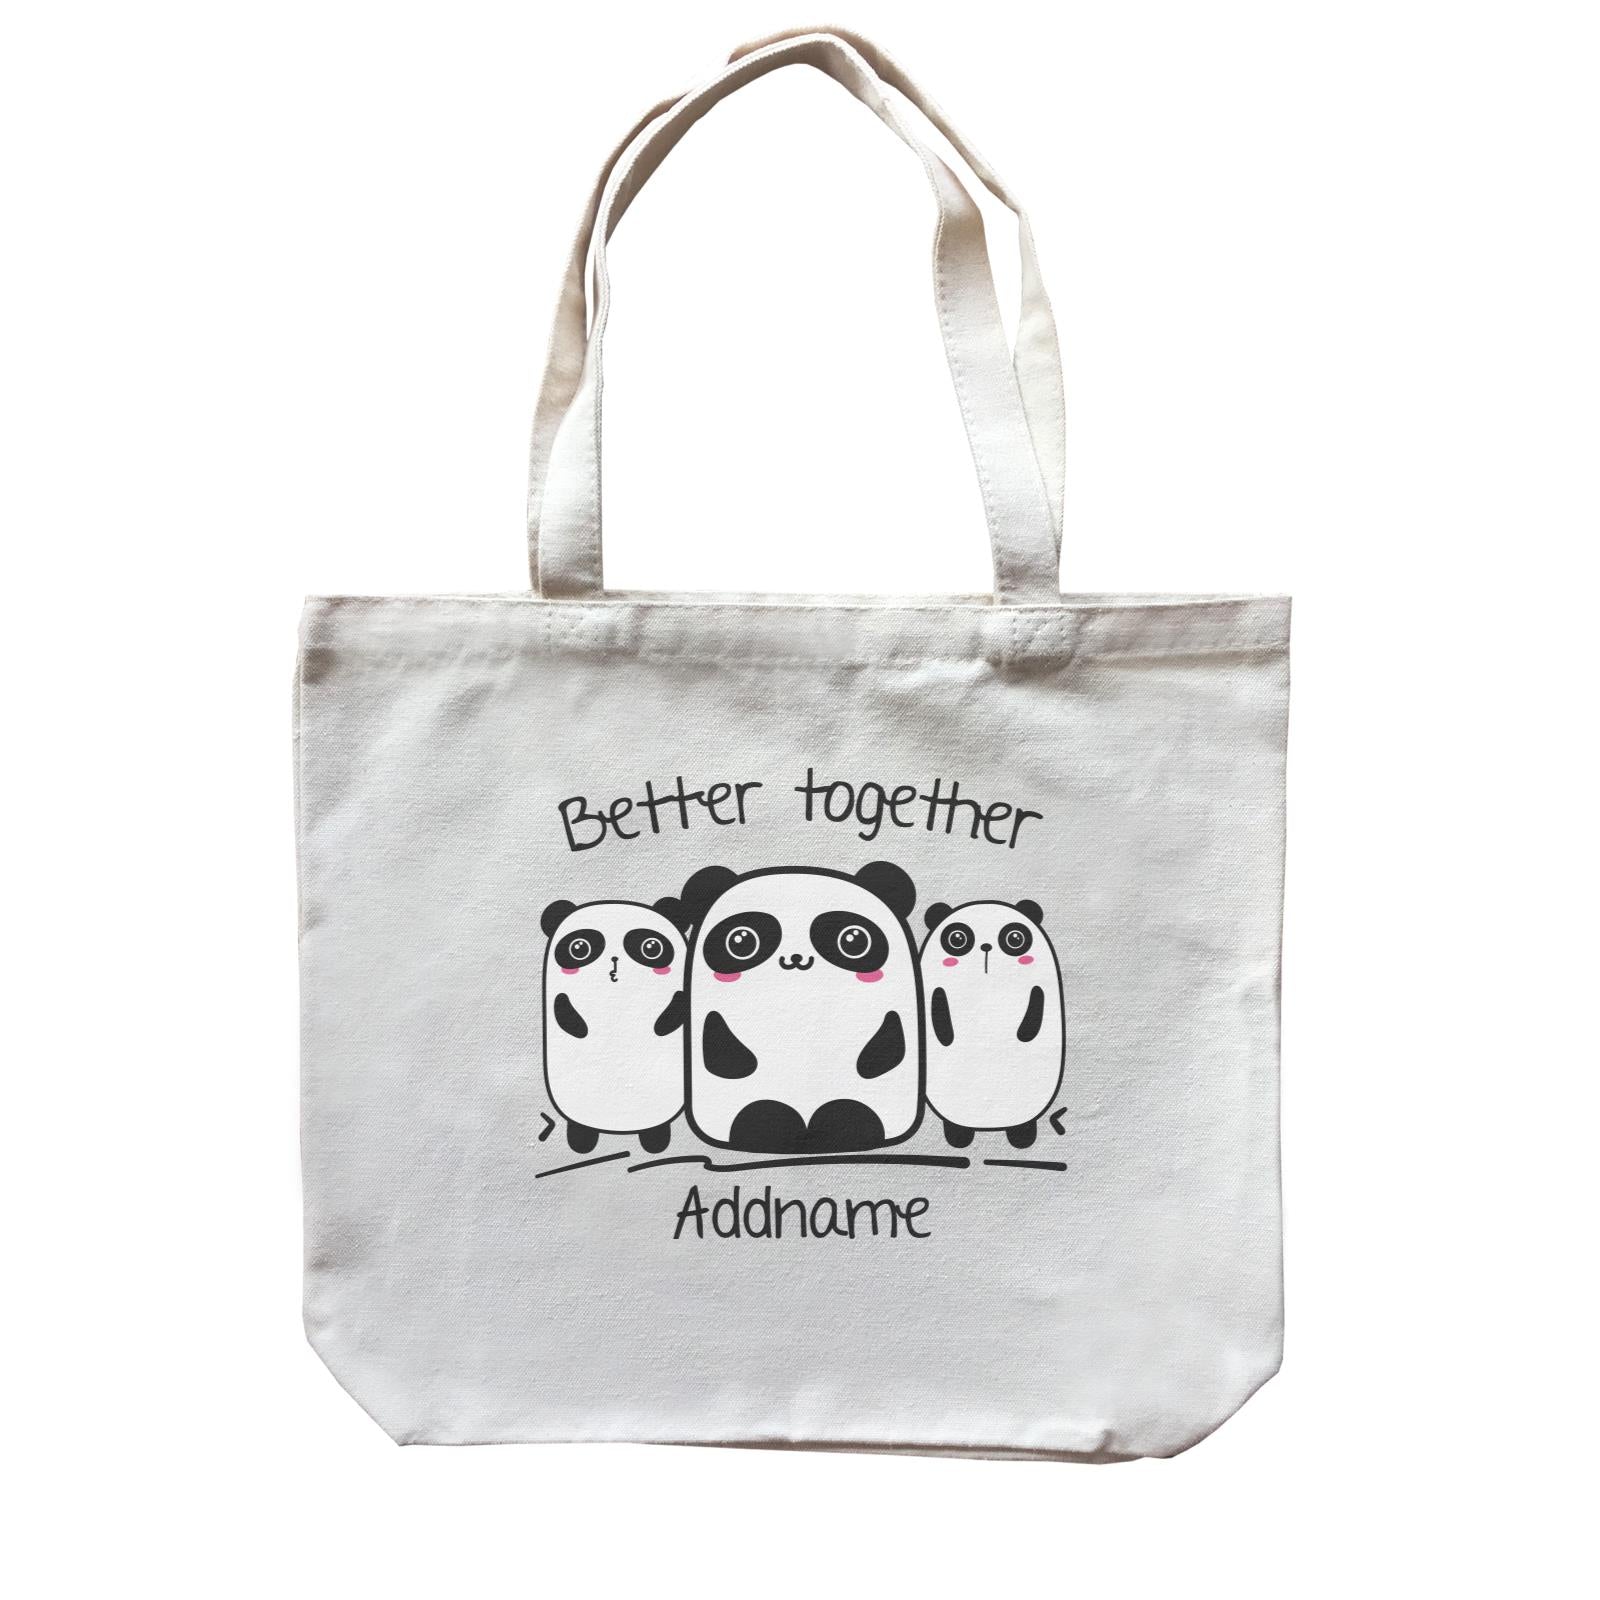 Cute Animals And Friends Series Panda Better Together Group Addname Canvas Bag